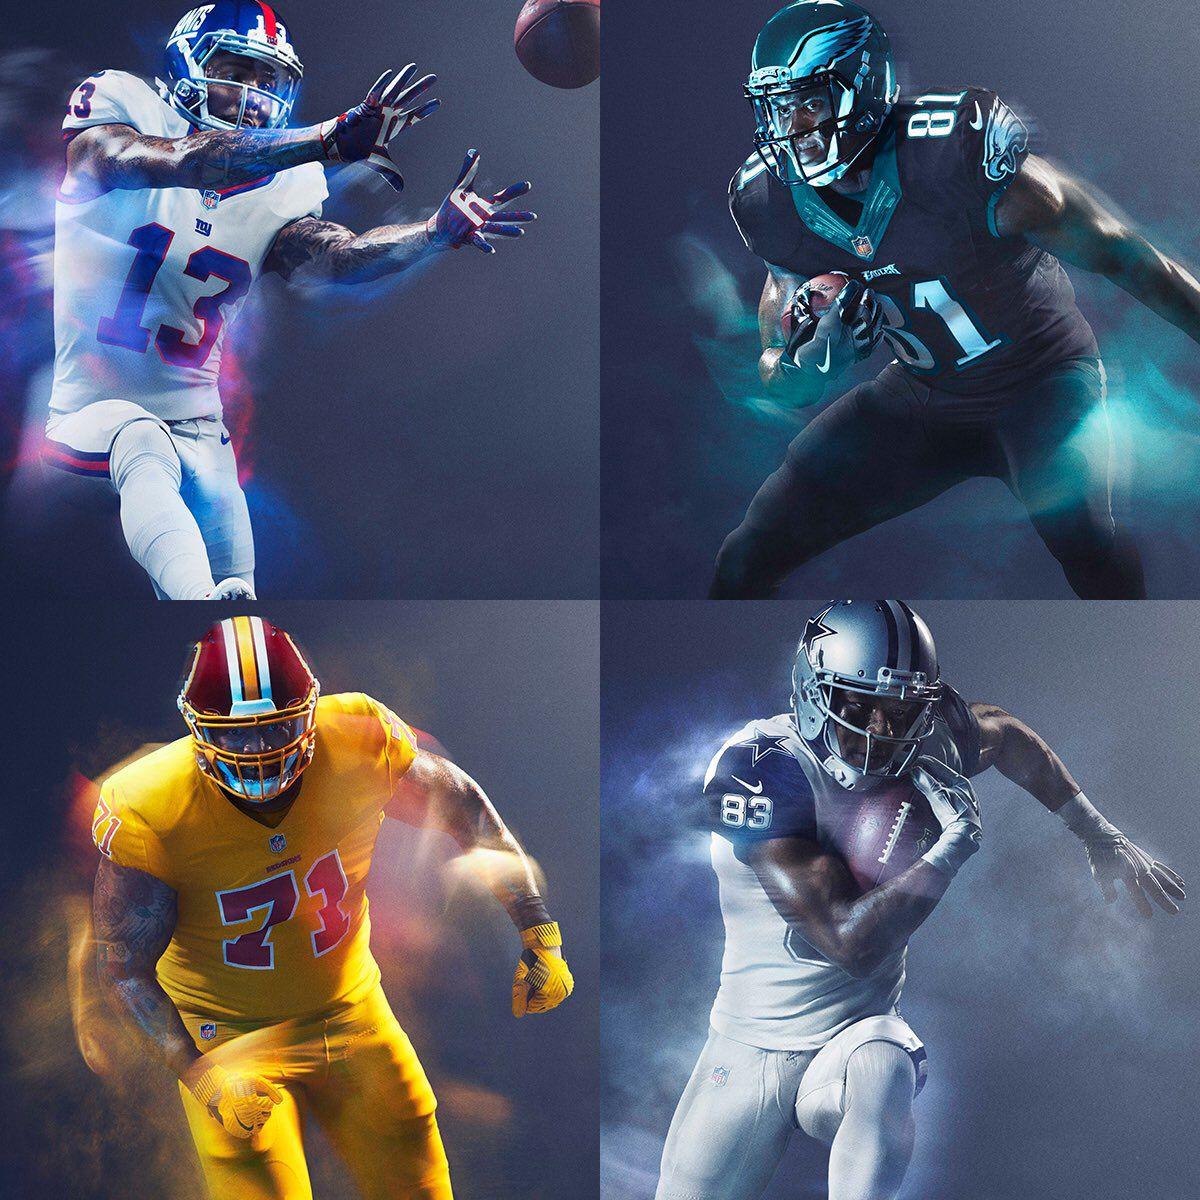 Check out the Color Rush uniforms the Cowboys will wear vs. the